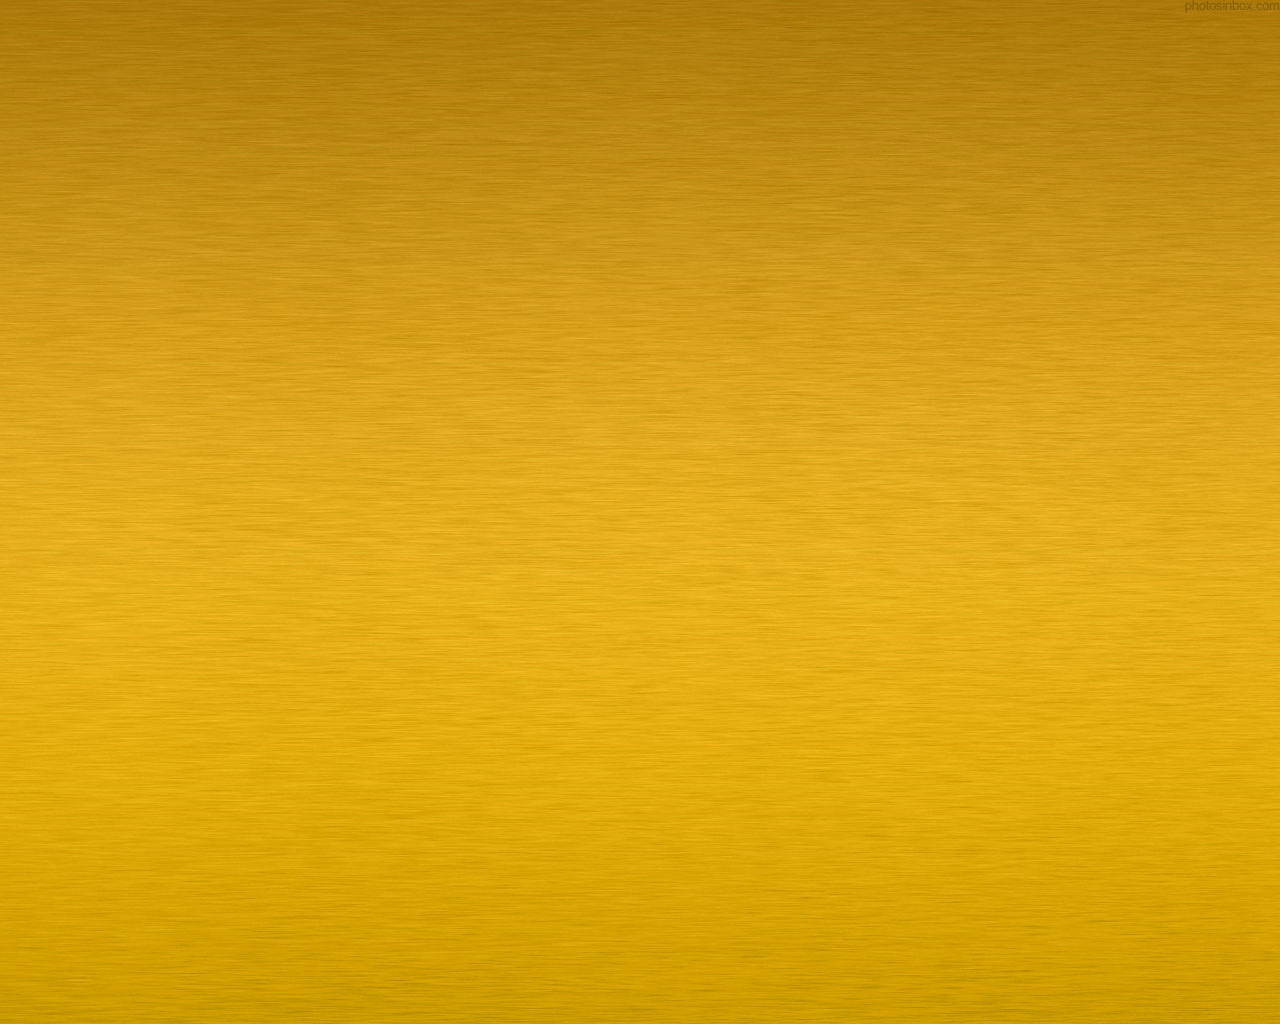 Gold Background Gold Texture Golden Background Image for Free Download